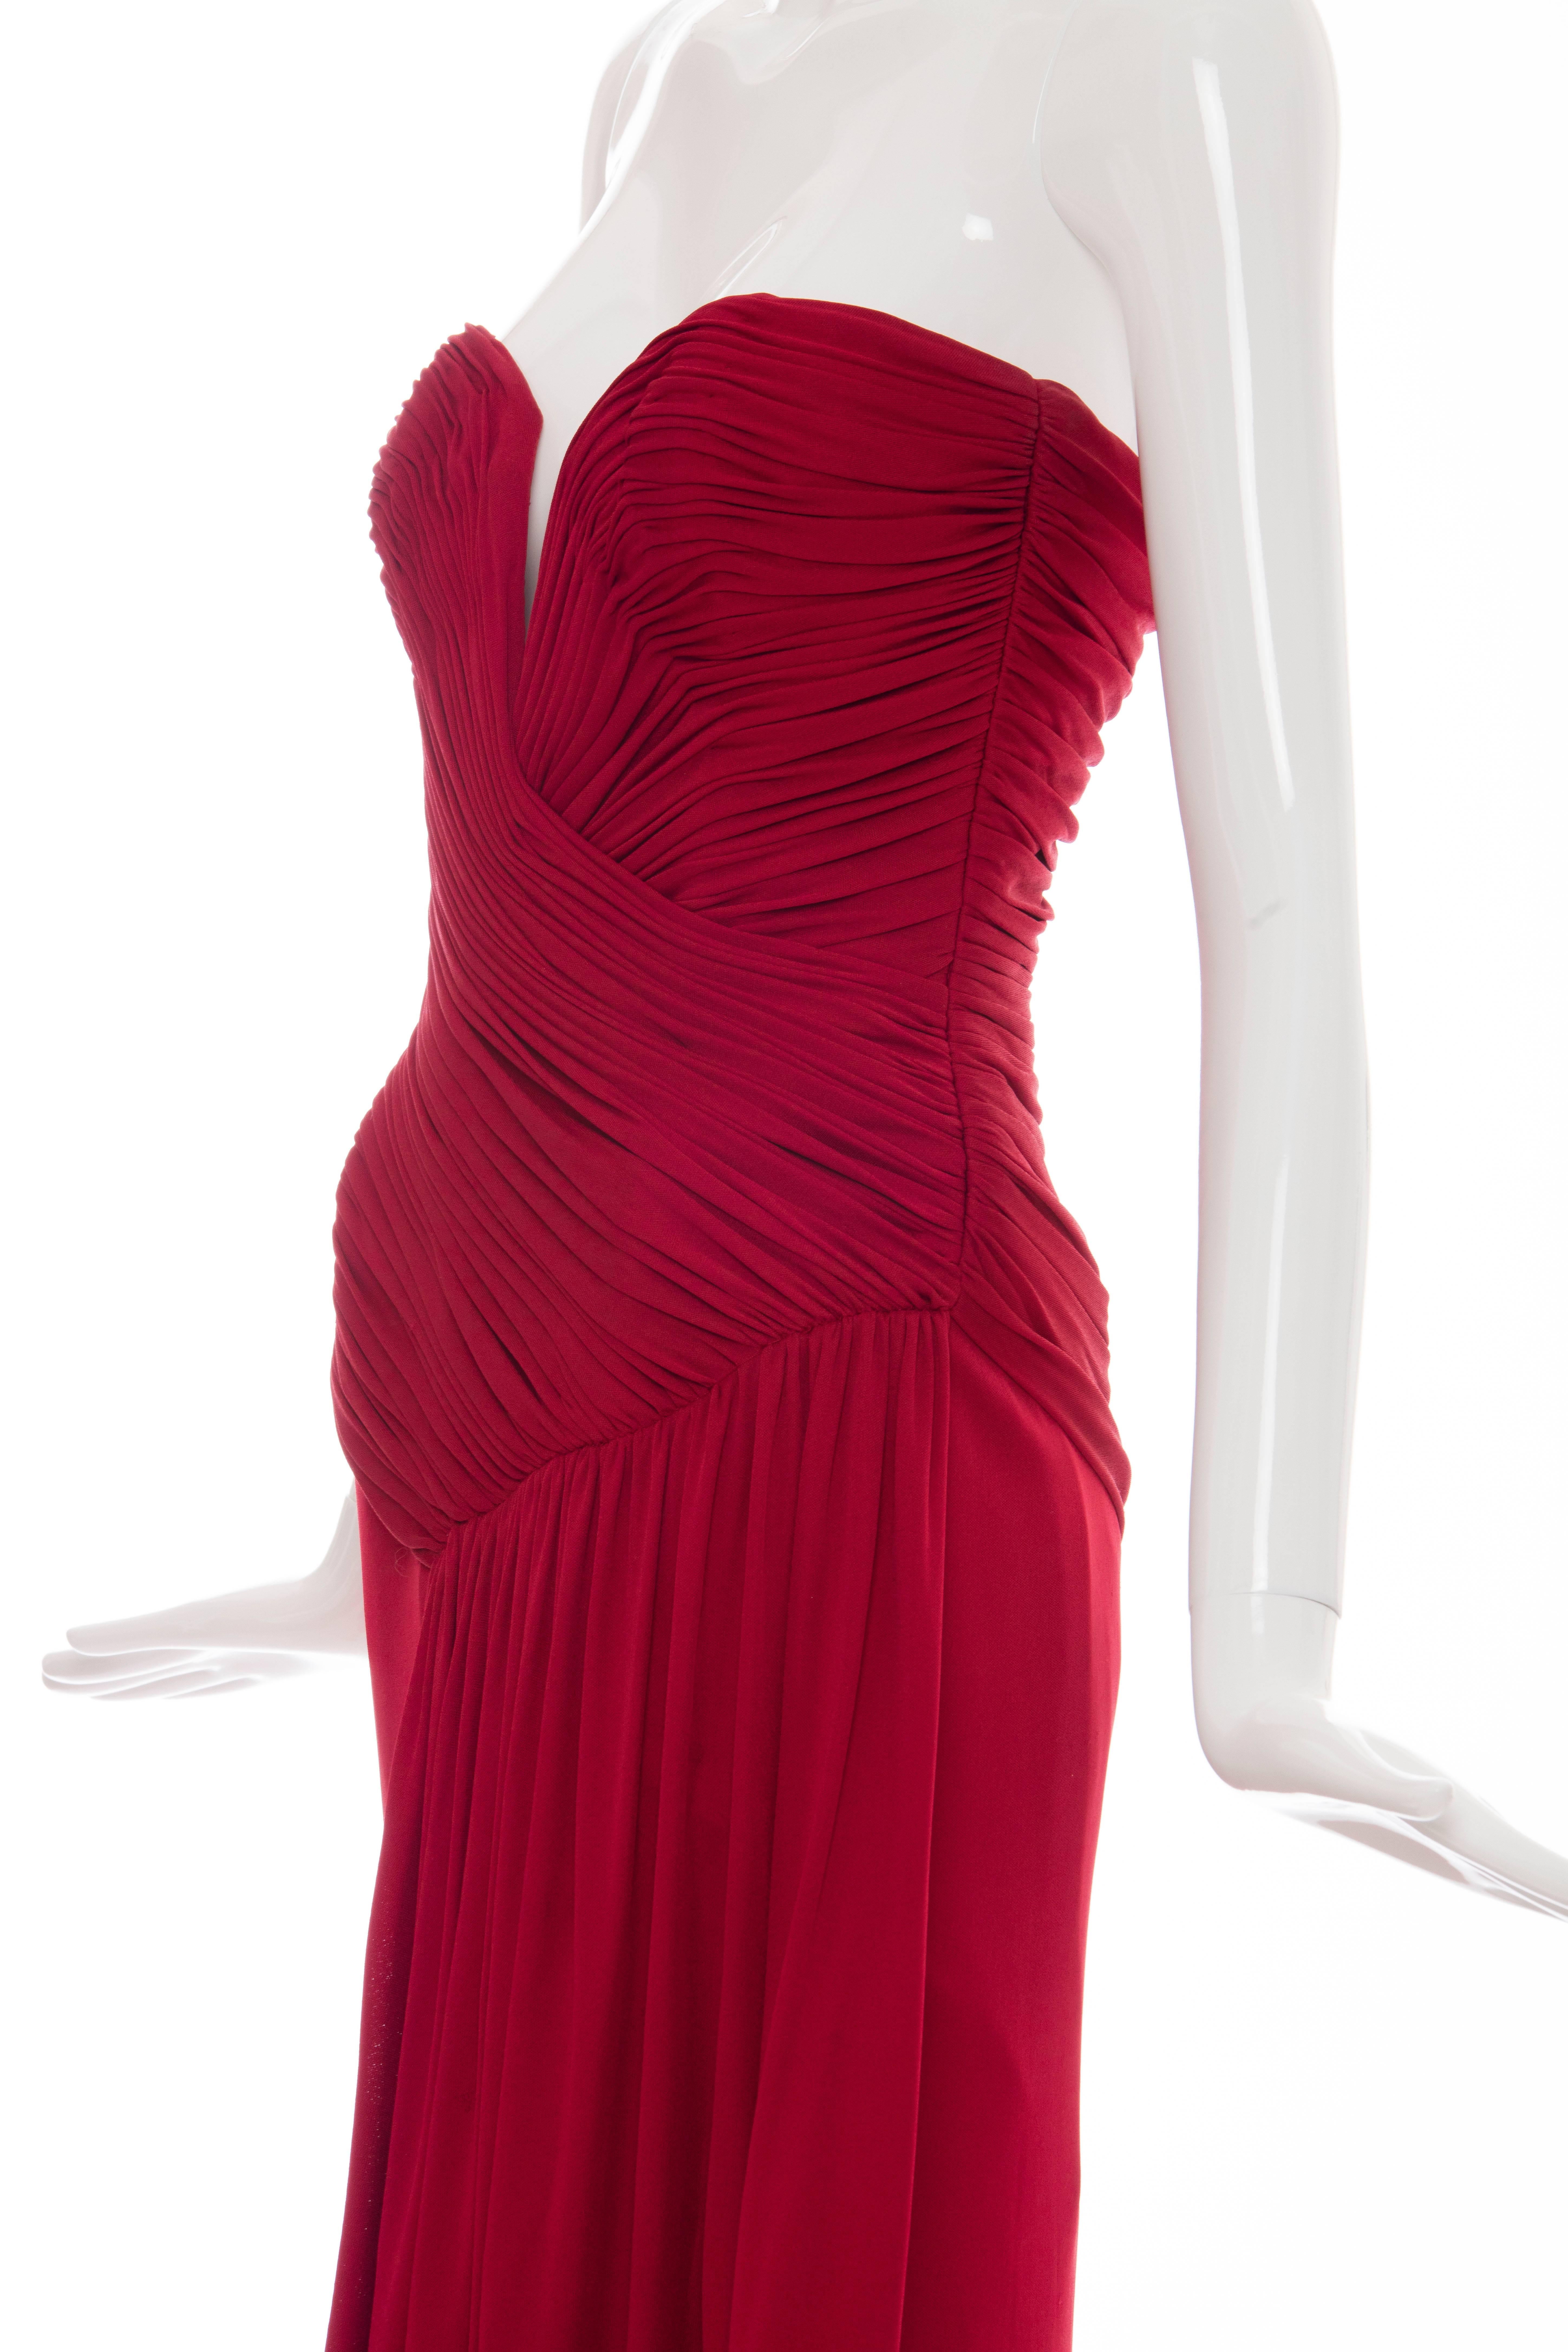 Vicky Tiel Couture Red Strapless Dress With Ruched Bodice, Circa 1980's For Sale 5